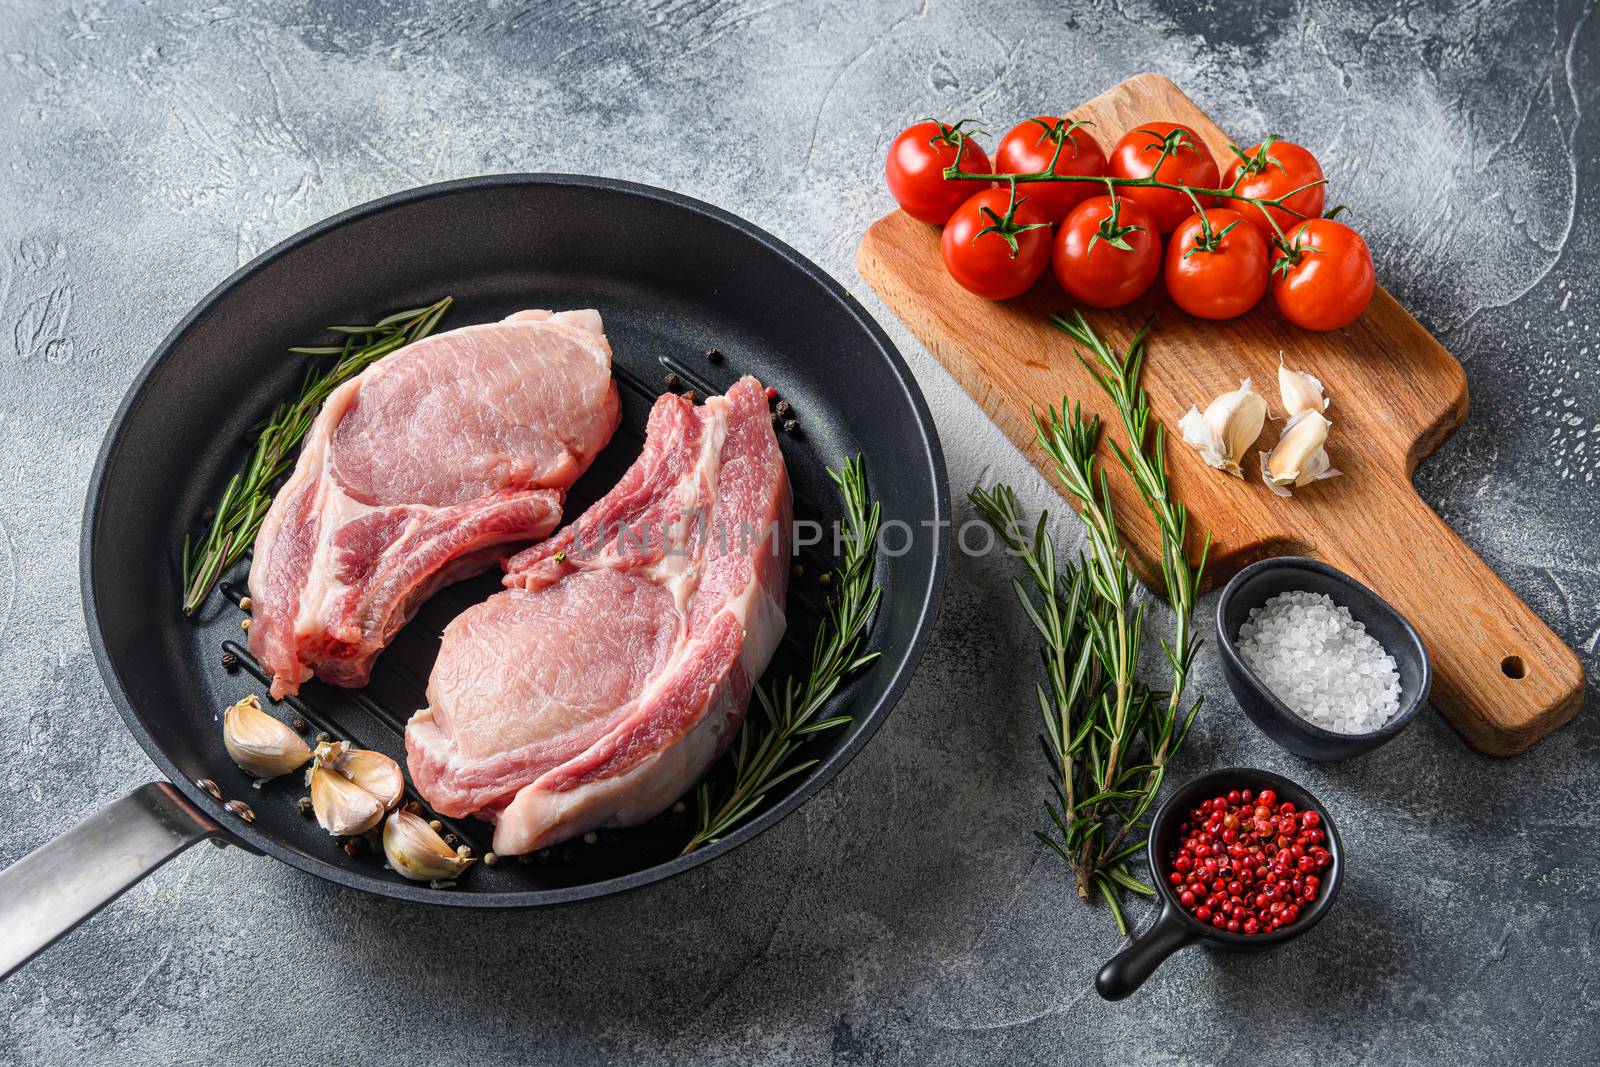 Pork chop on a bone in a black frying grill pan on a grey textured stone background with black cloth rosemary garlic peppercorns and tomatoes on chopping board ingredients side view by Ilianesolenyi